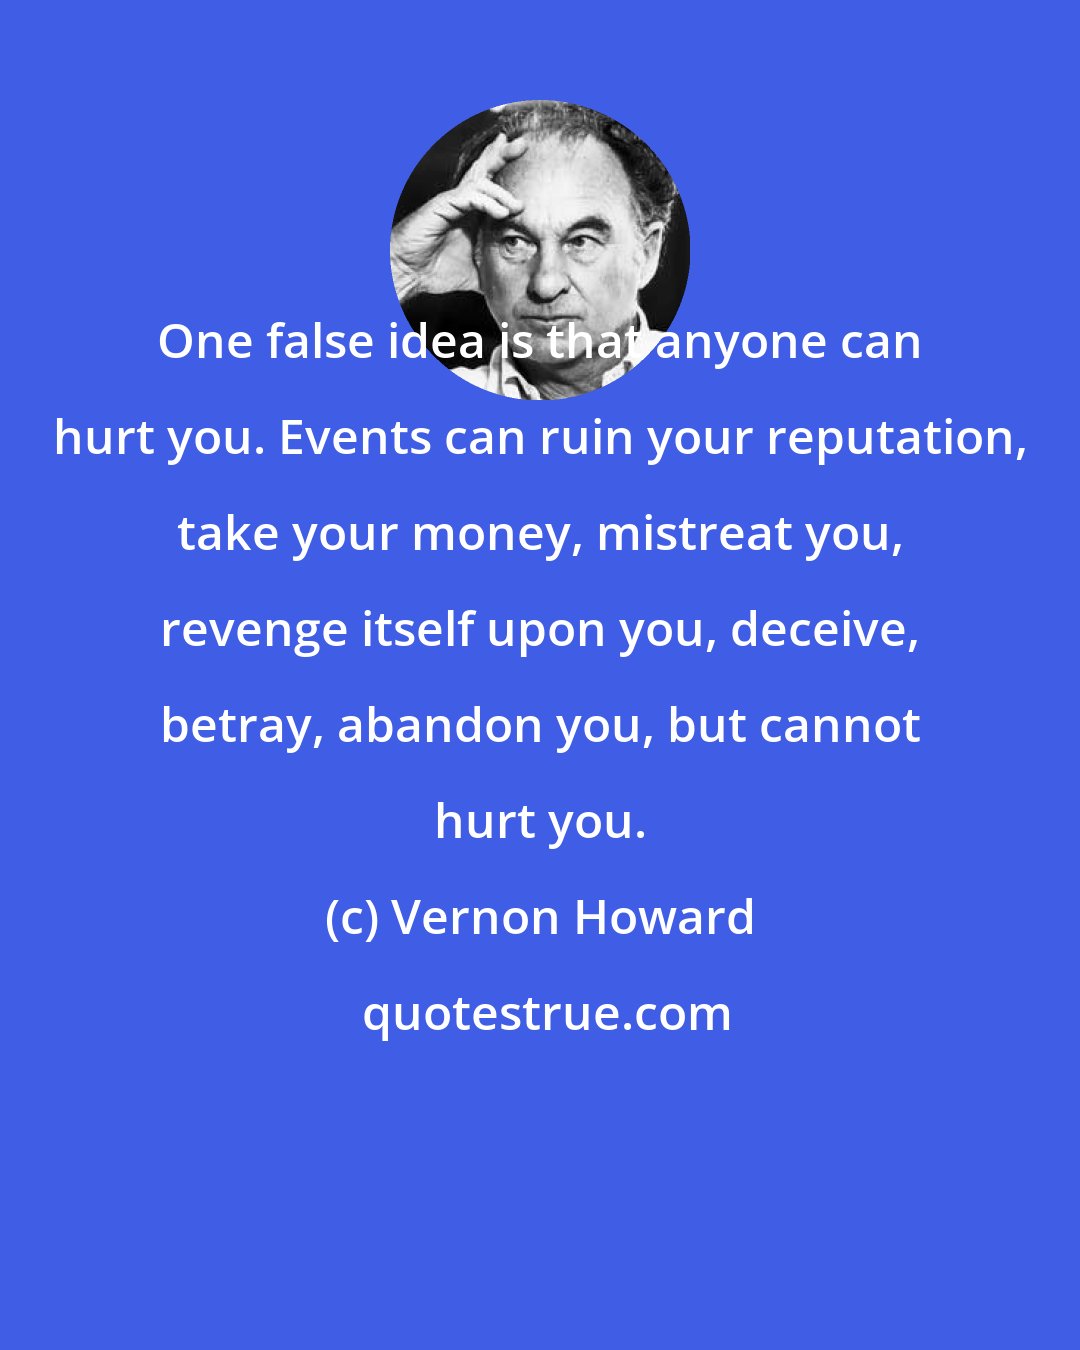 Vernon Howard: One false idea is that anyone can hurt you. Events can ruin your reputation, take your money, mistreat you, revenge itself upon you, deceive, betray, abandon you, but cannot hurt you.